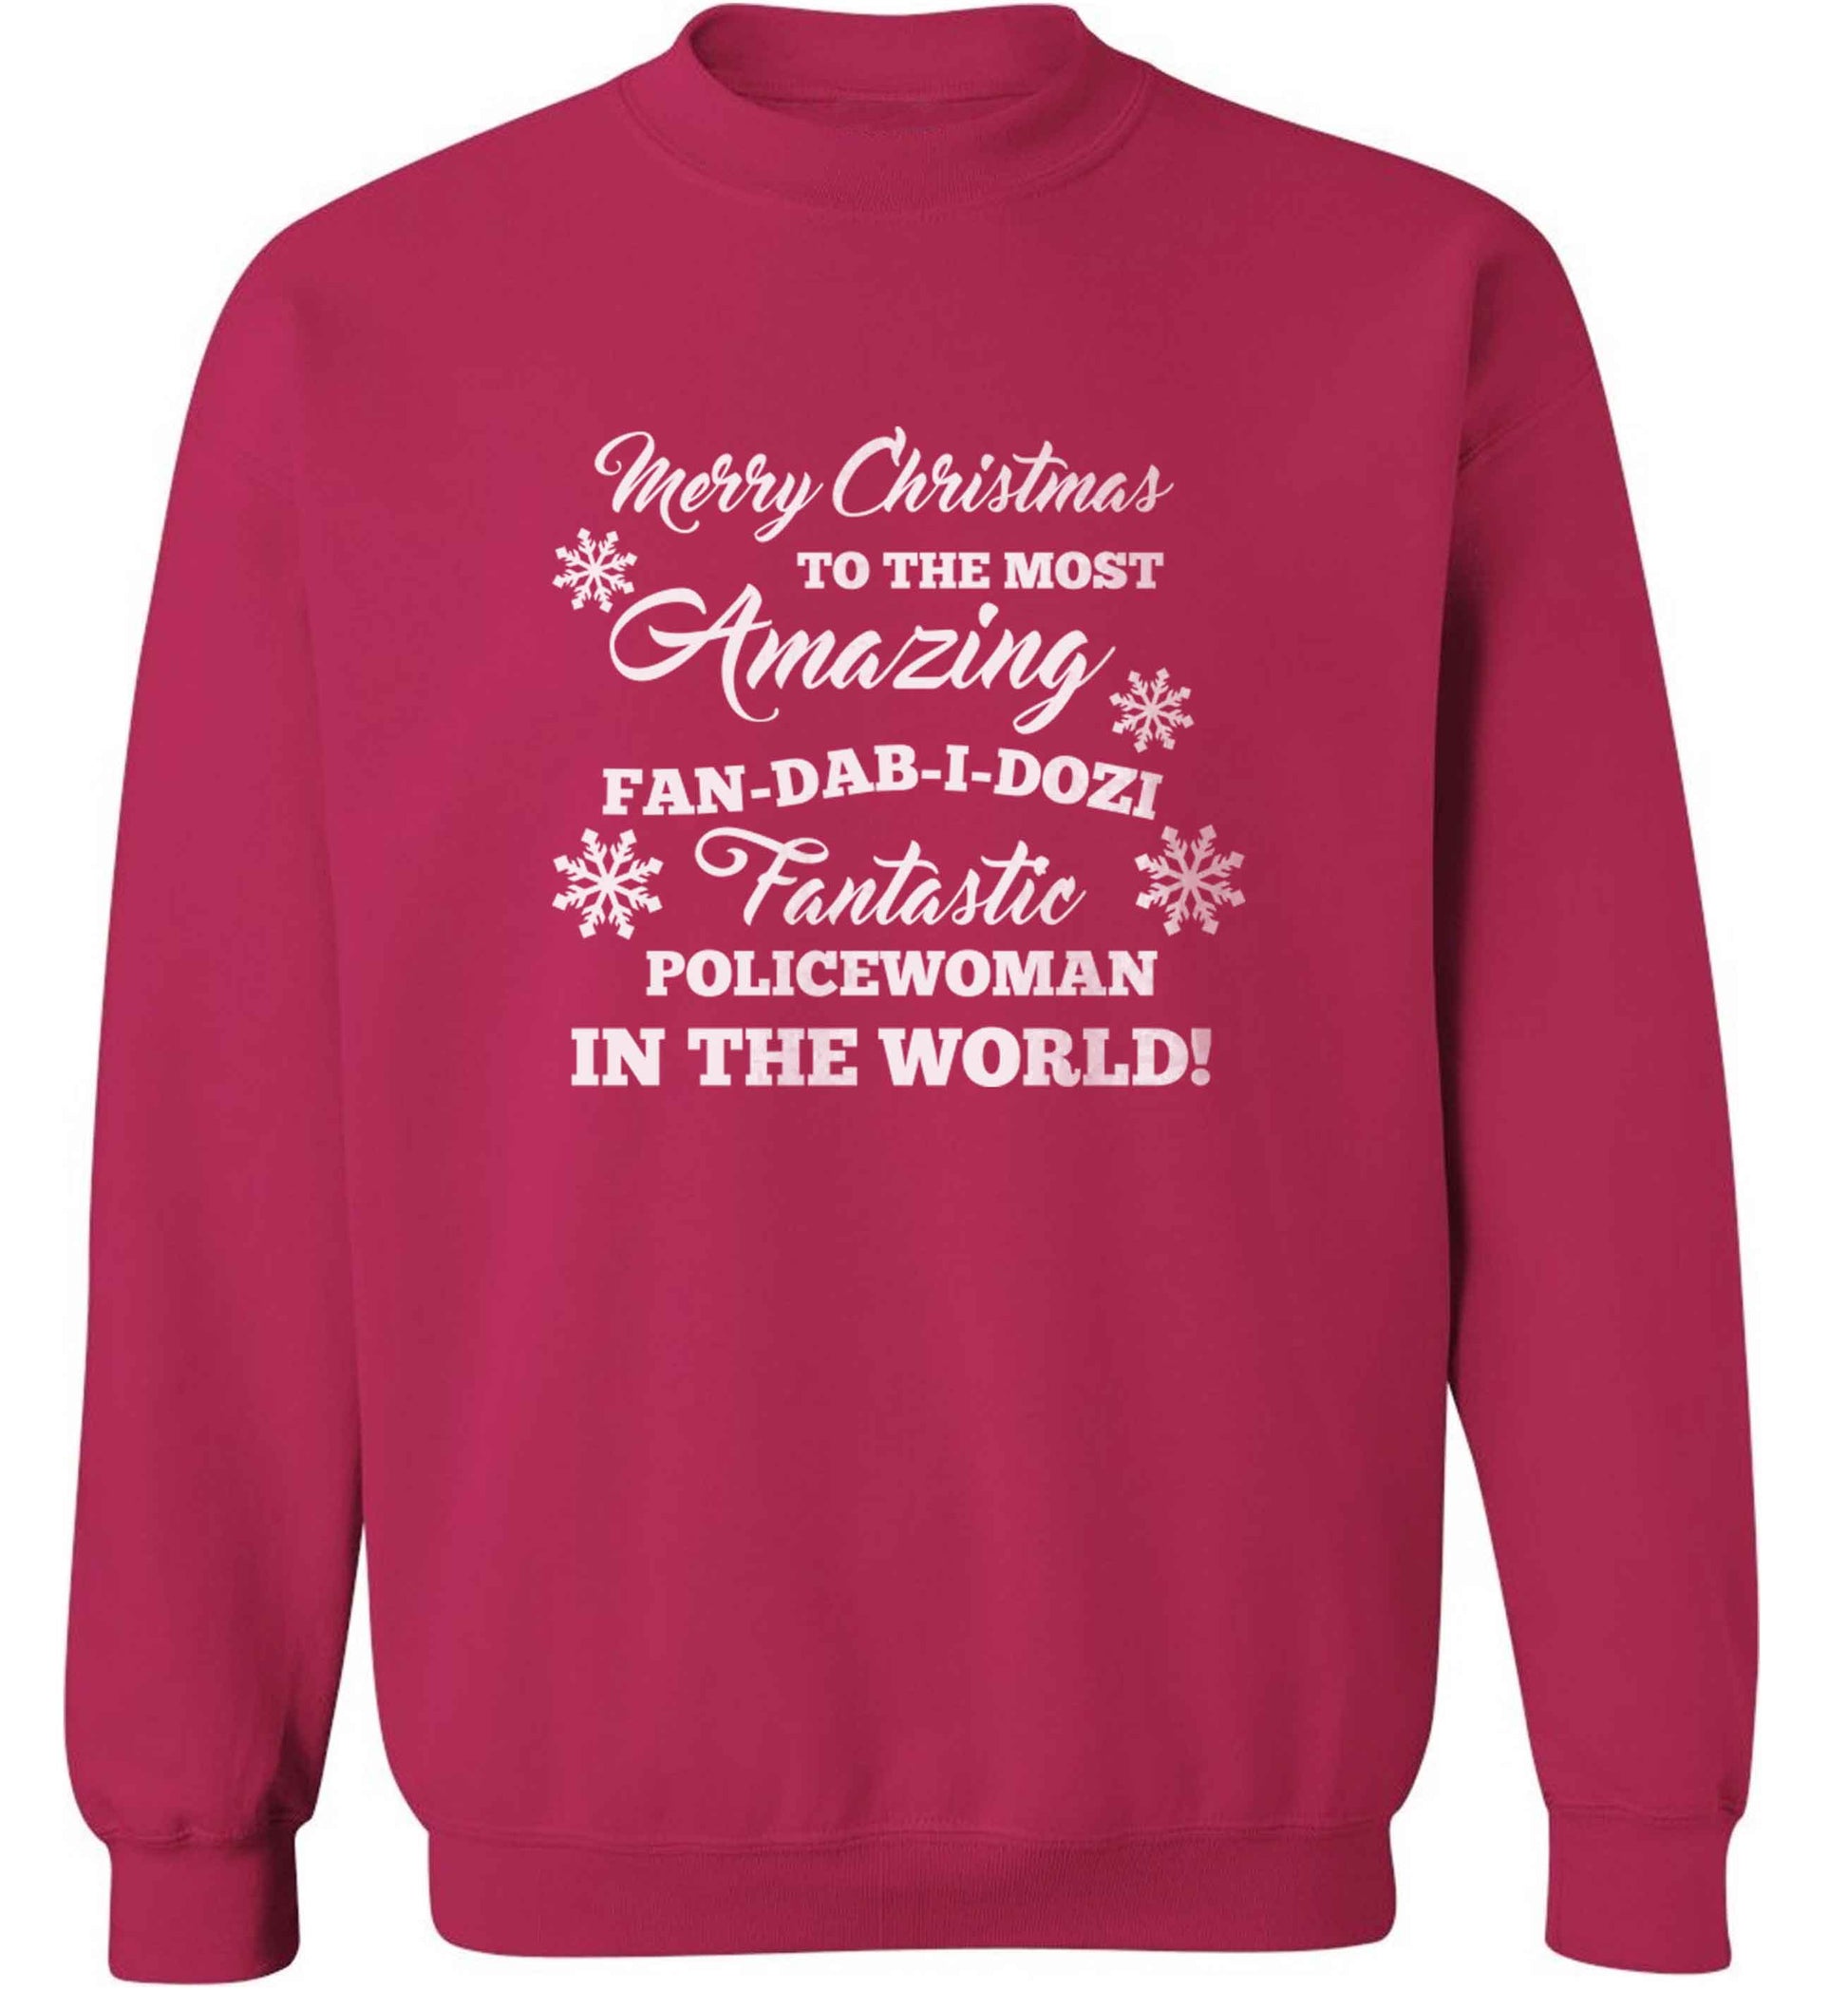 Merry Christmas to the most amazing policewoman in the world! adult's unisex pink sweater 2XL